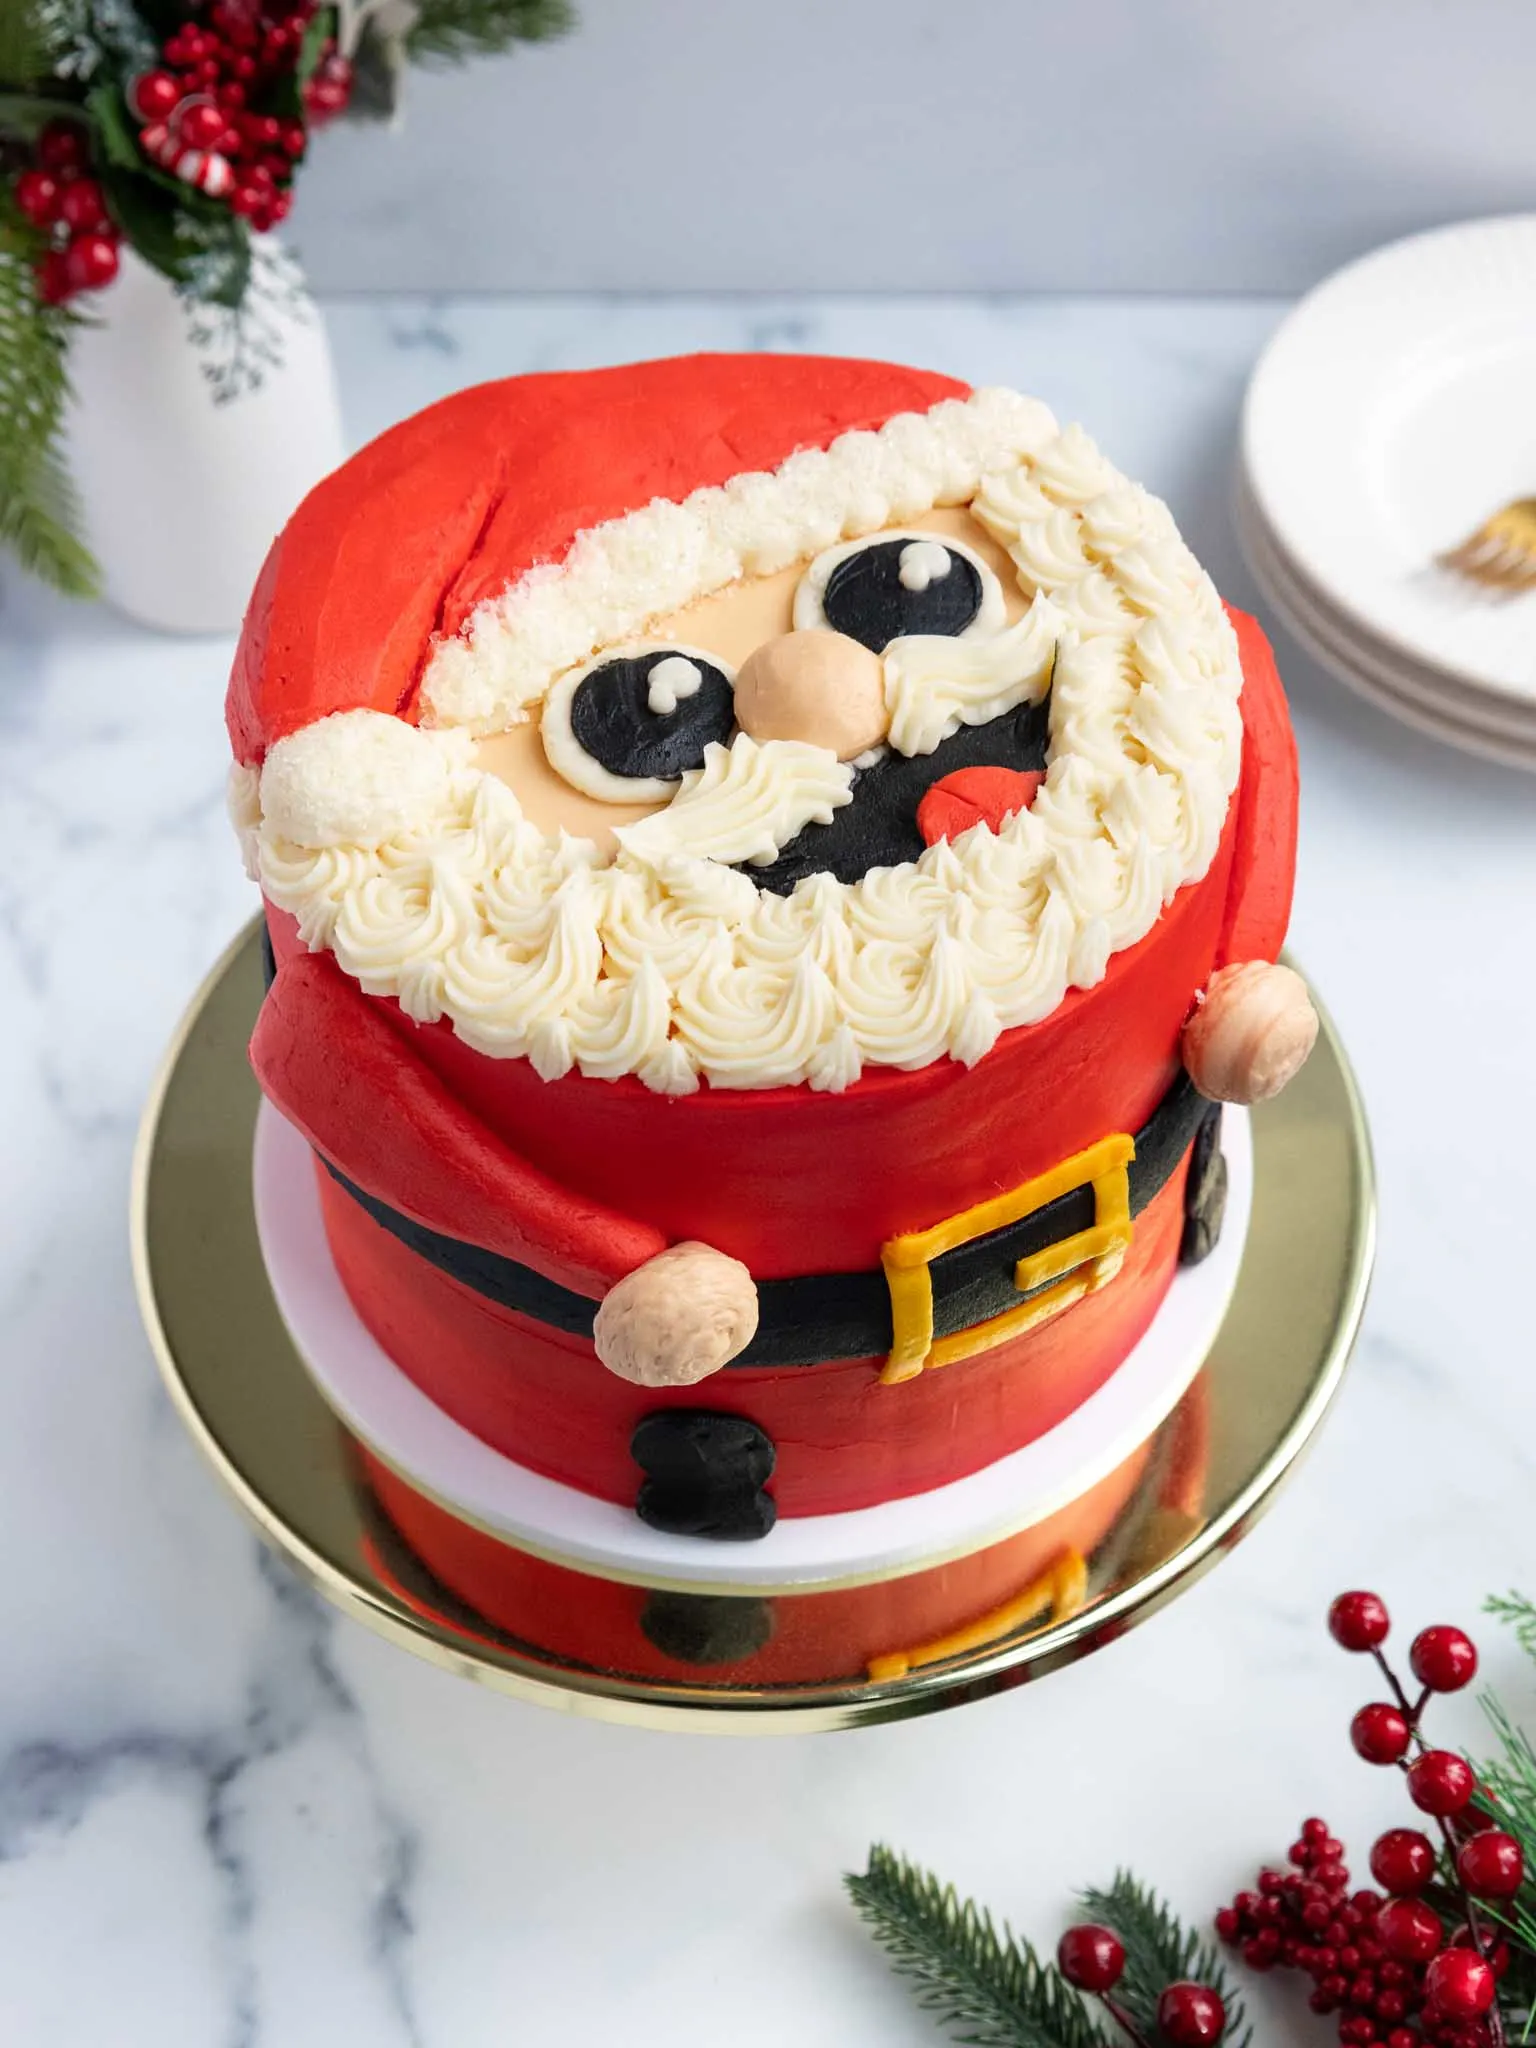 image of a cute Santa cake that's been decorated with buttercream